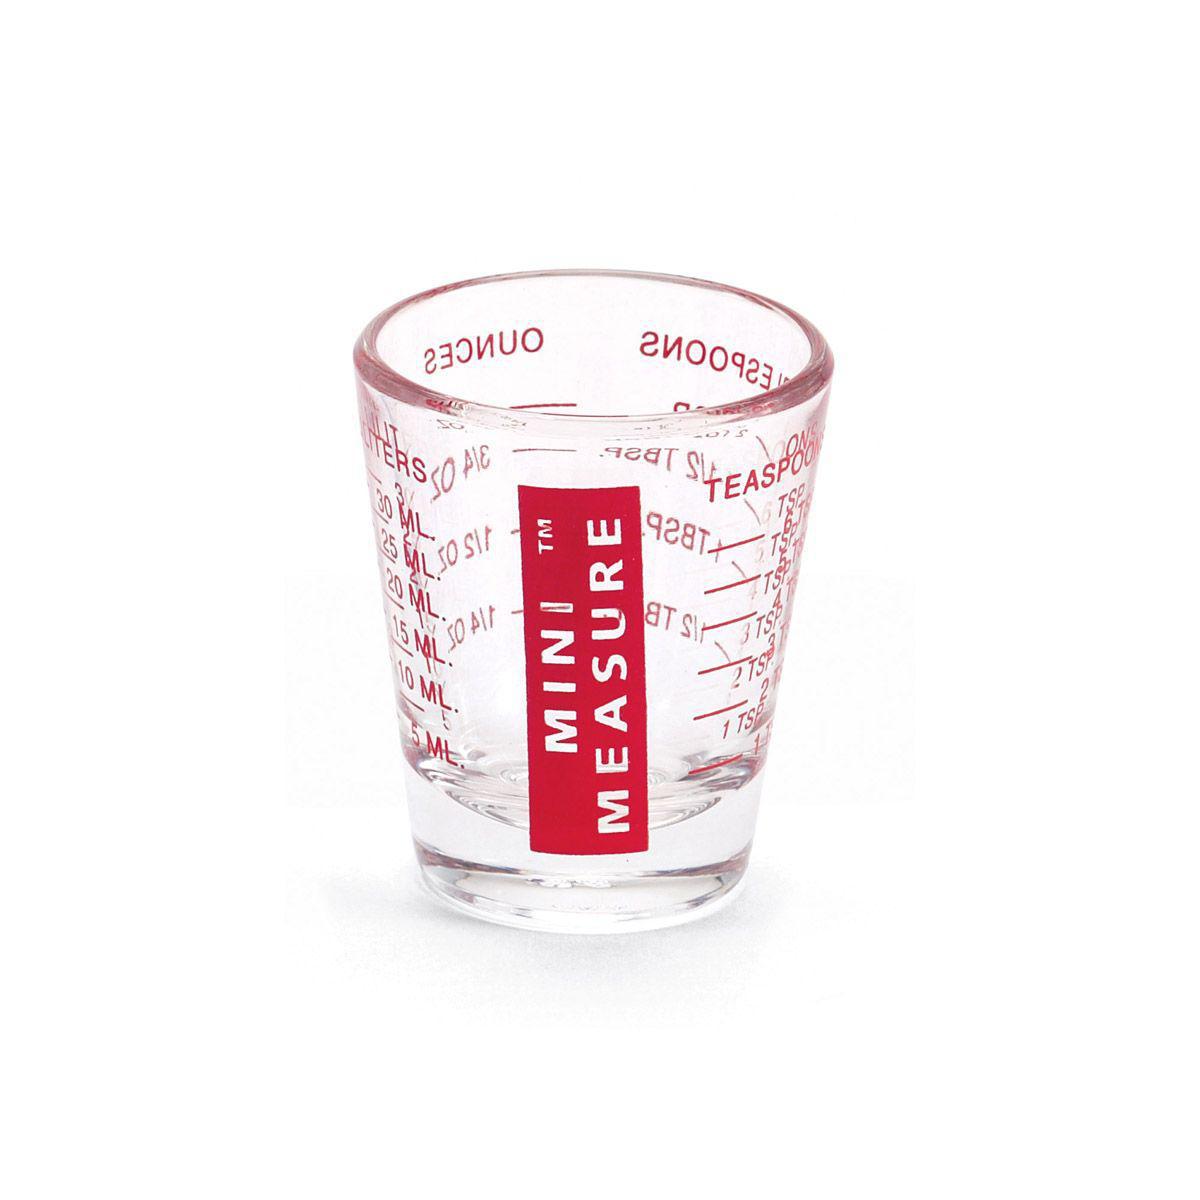 Anchor Hocking Harol Imports 1 Cup Measuring Cup, Each